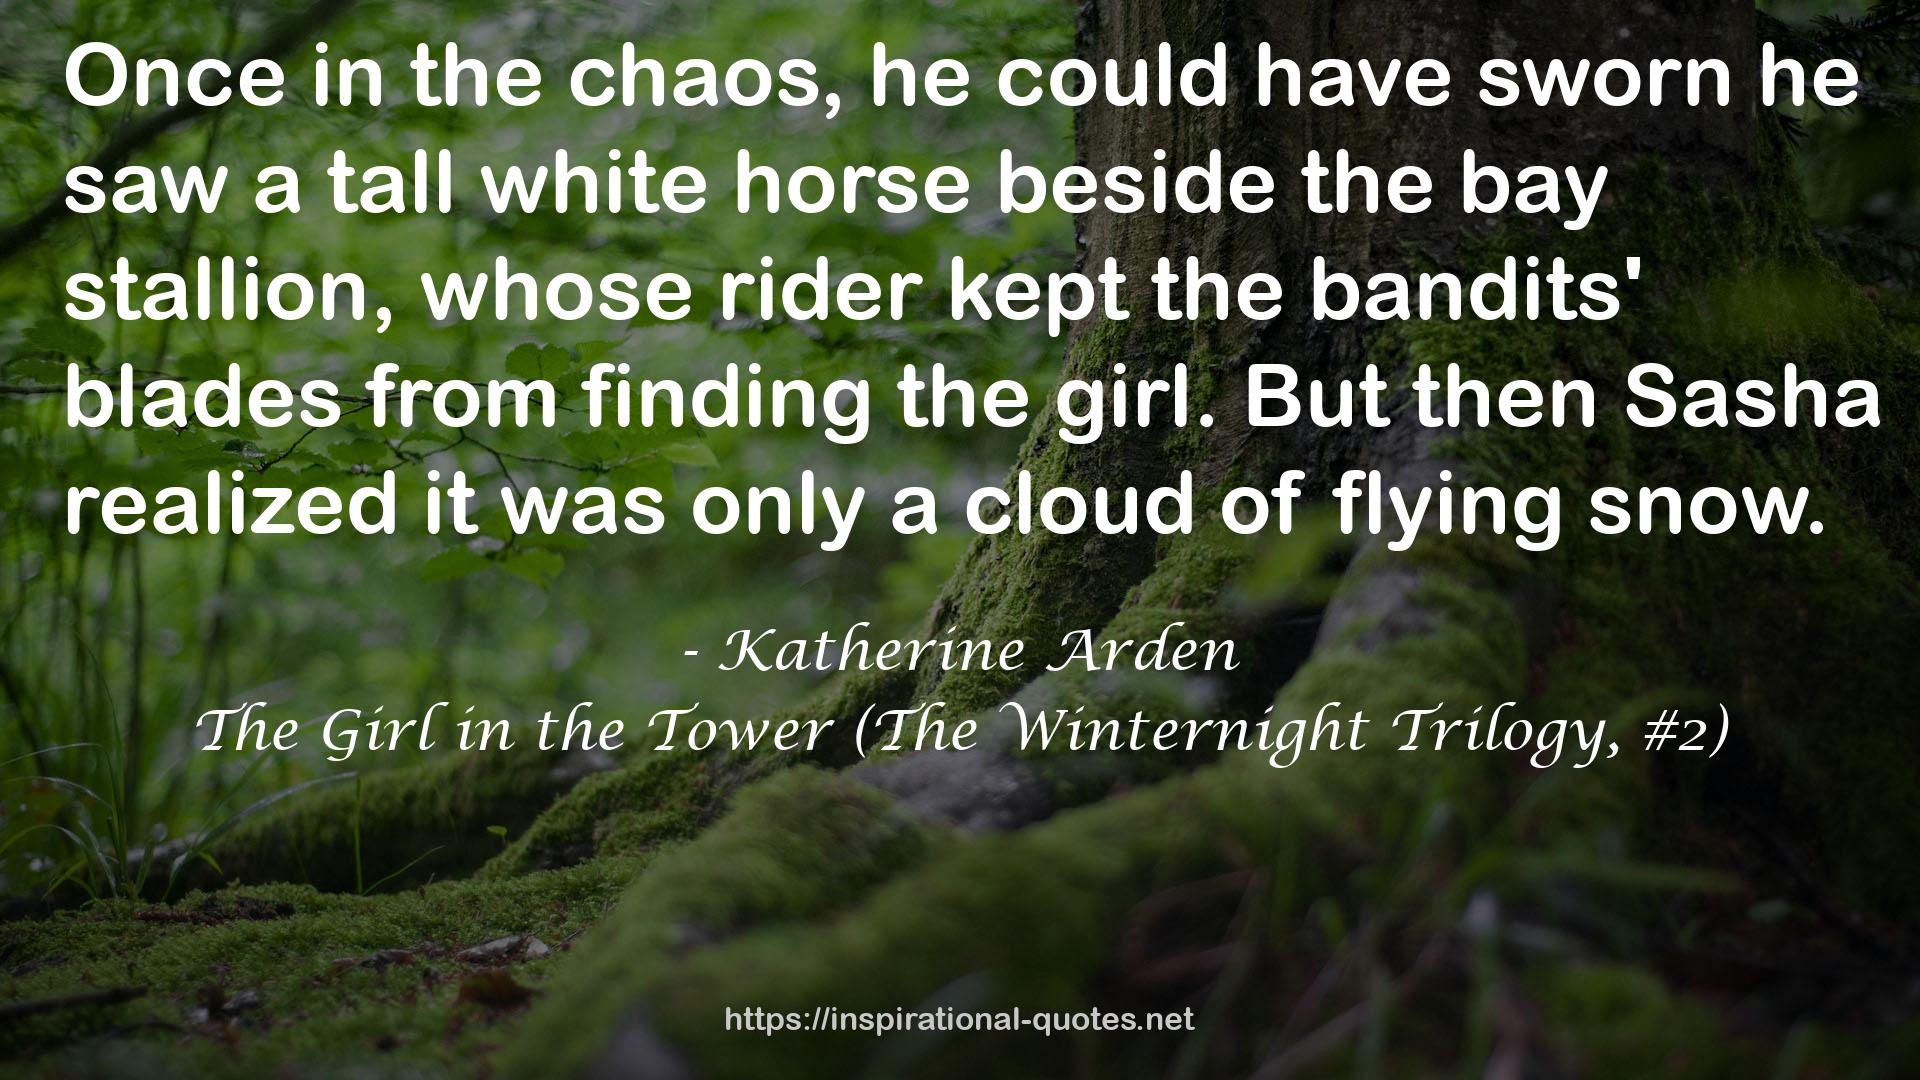 The Girl in the Tower (The Winternight Trilogy, #2) QUOTES